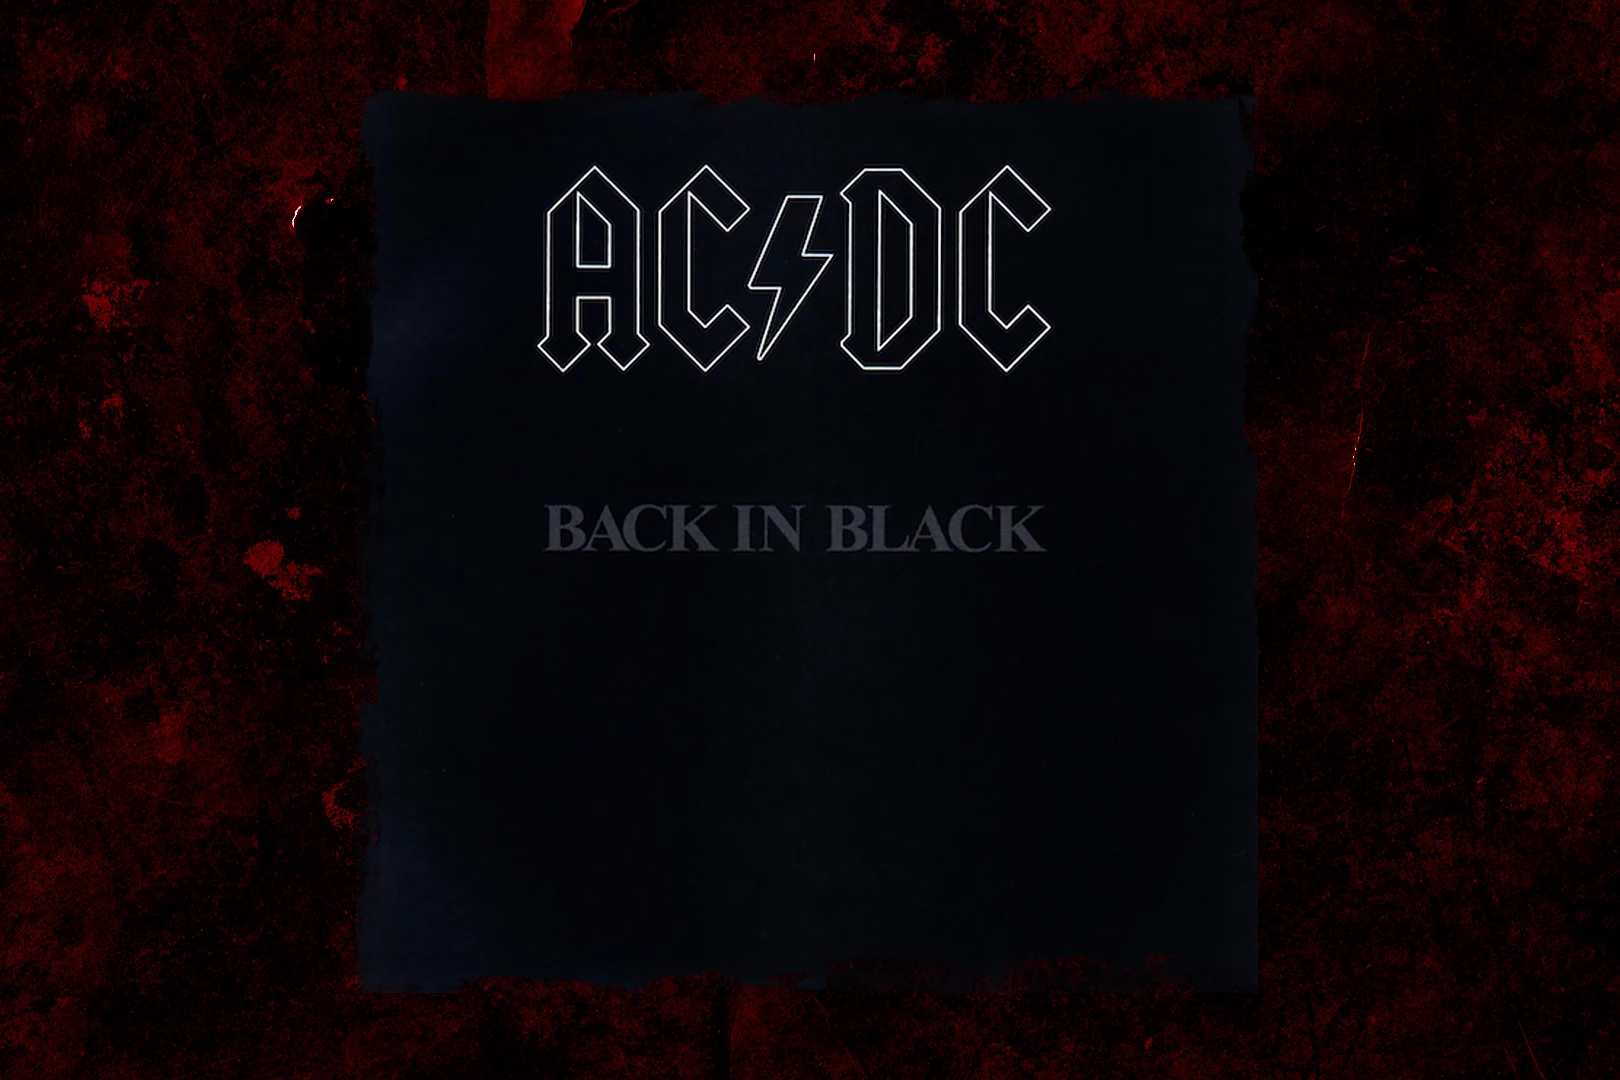 AC/DC - Back In Black - This Day In Music